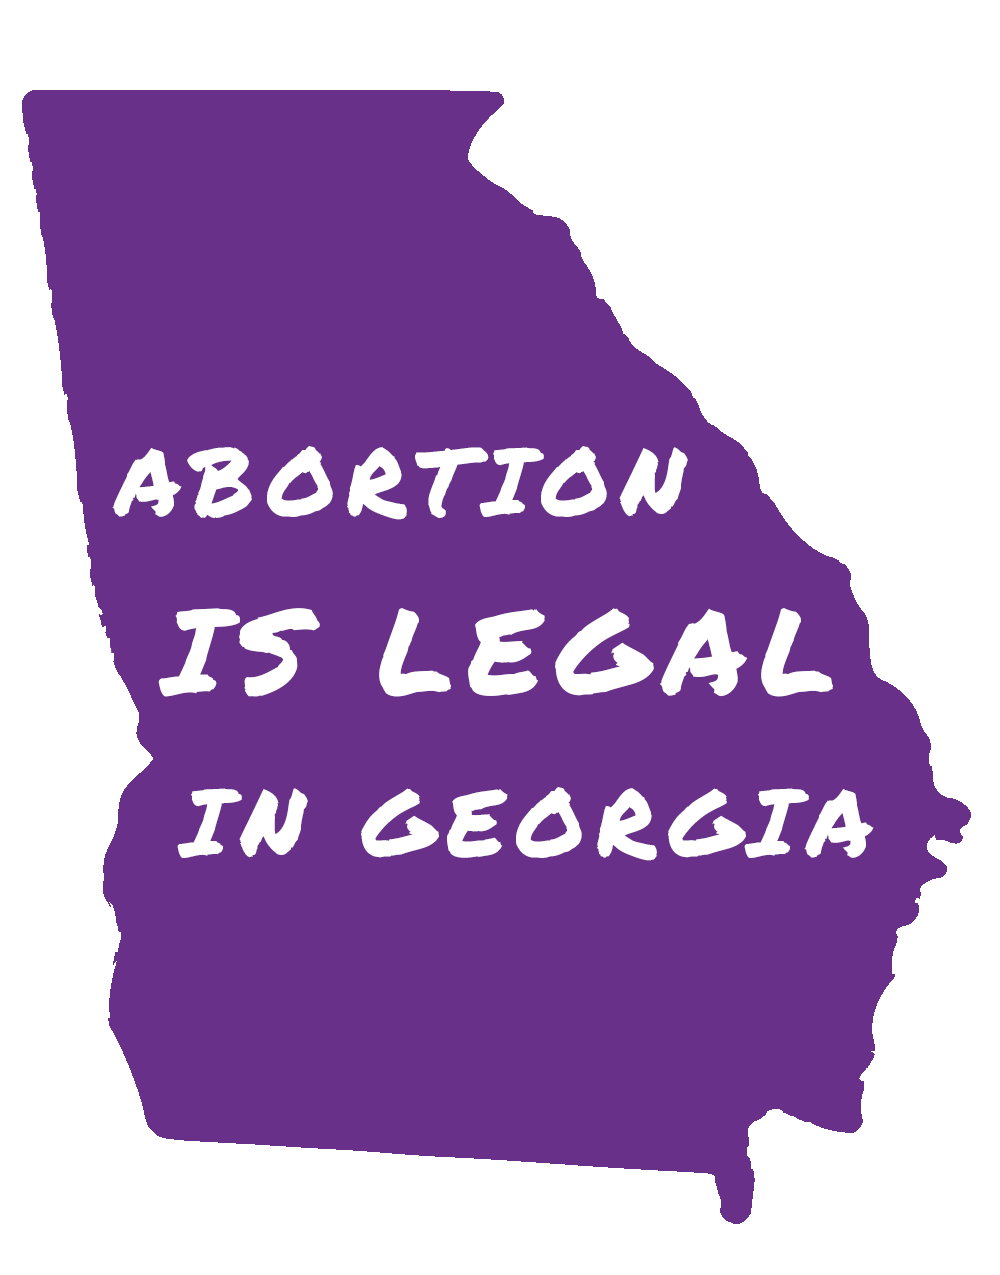 Yes - Abortion is Legal in Georgia